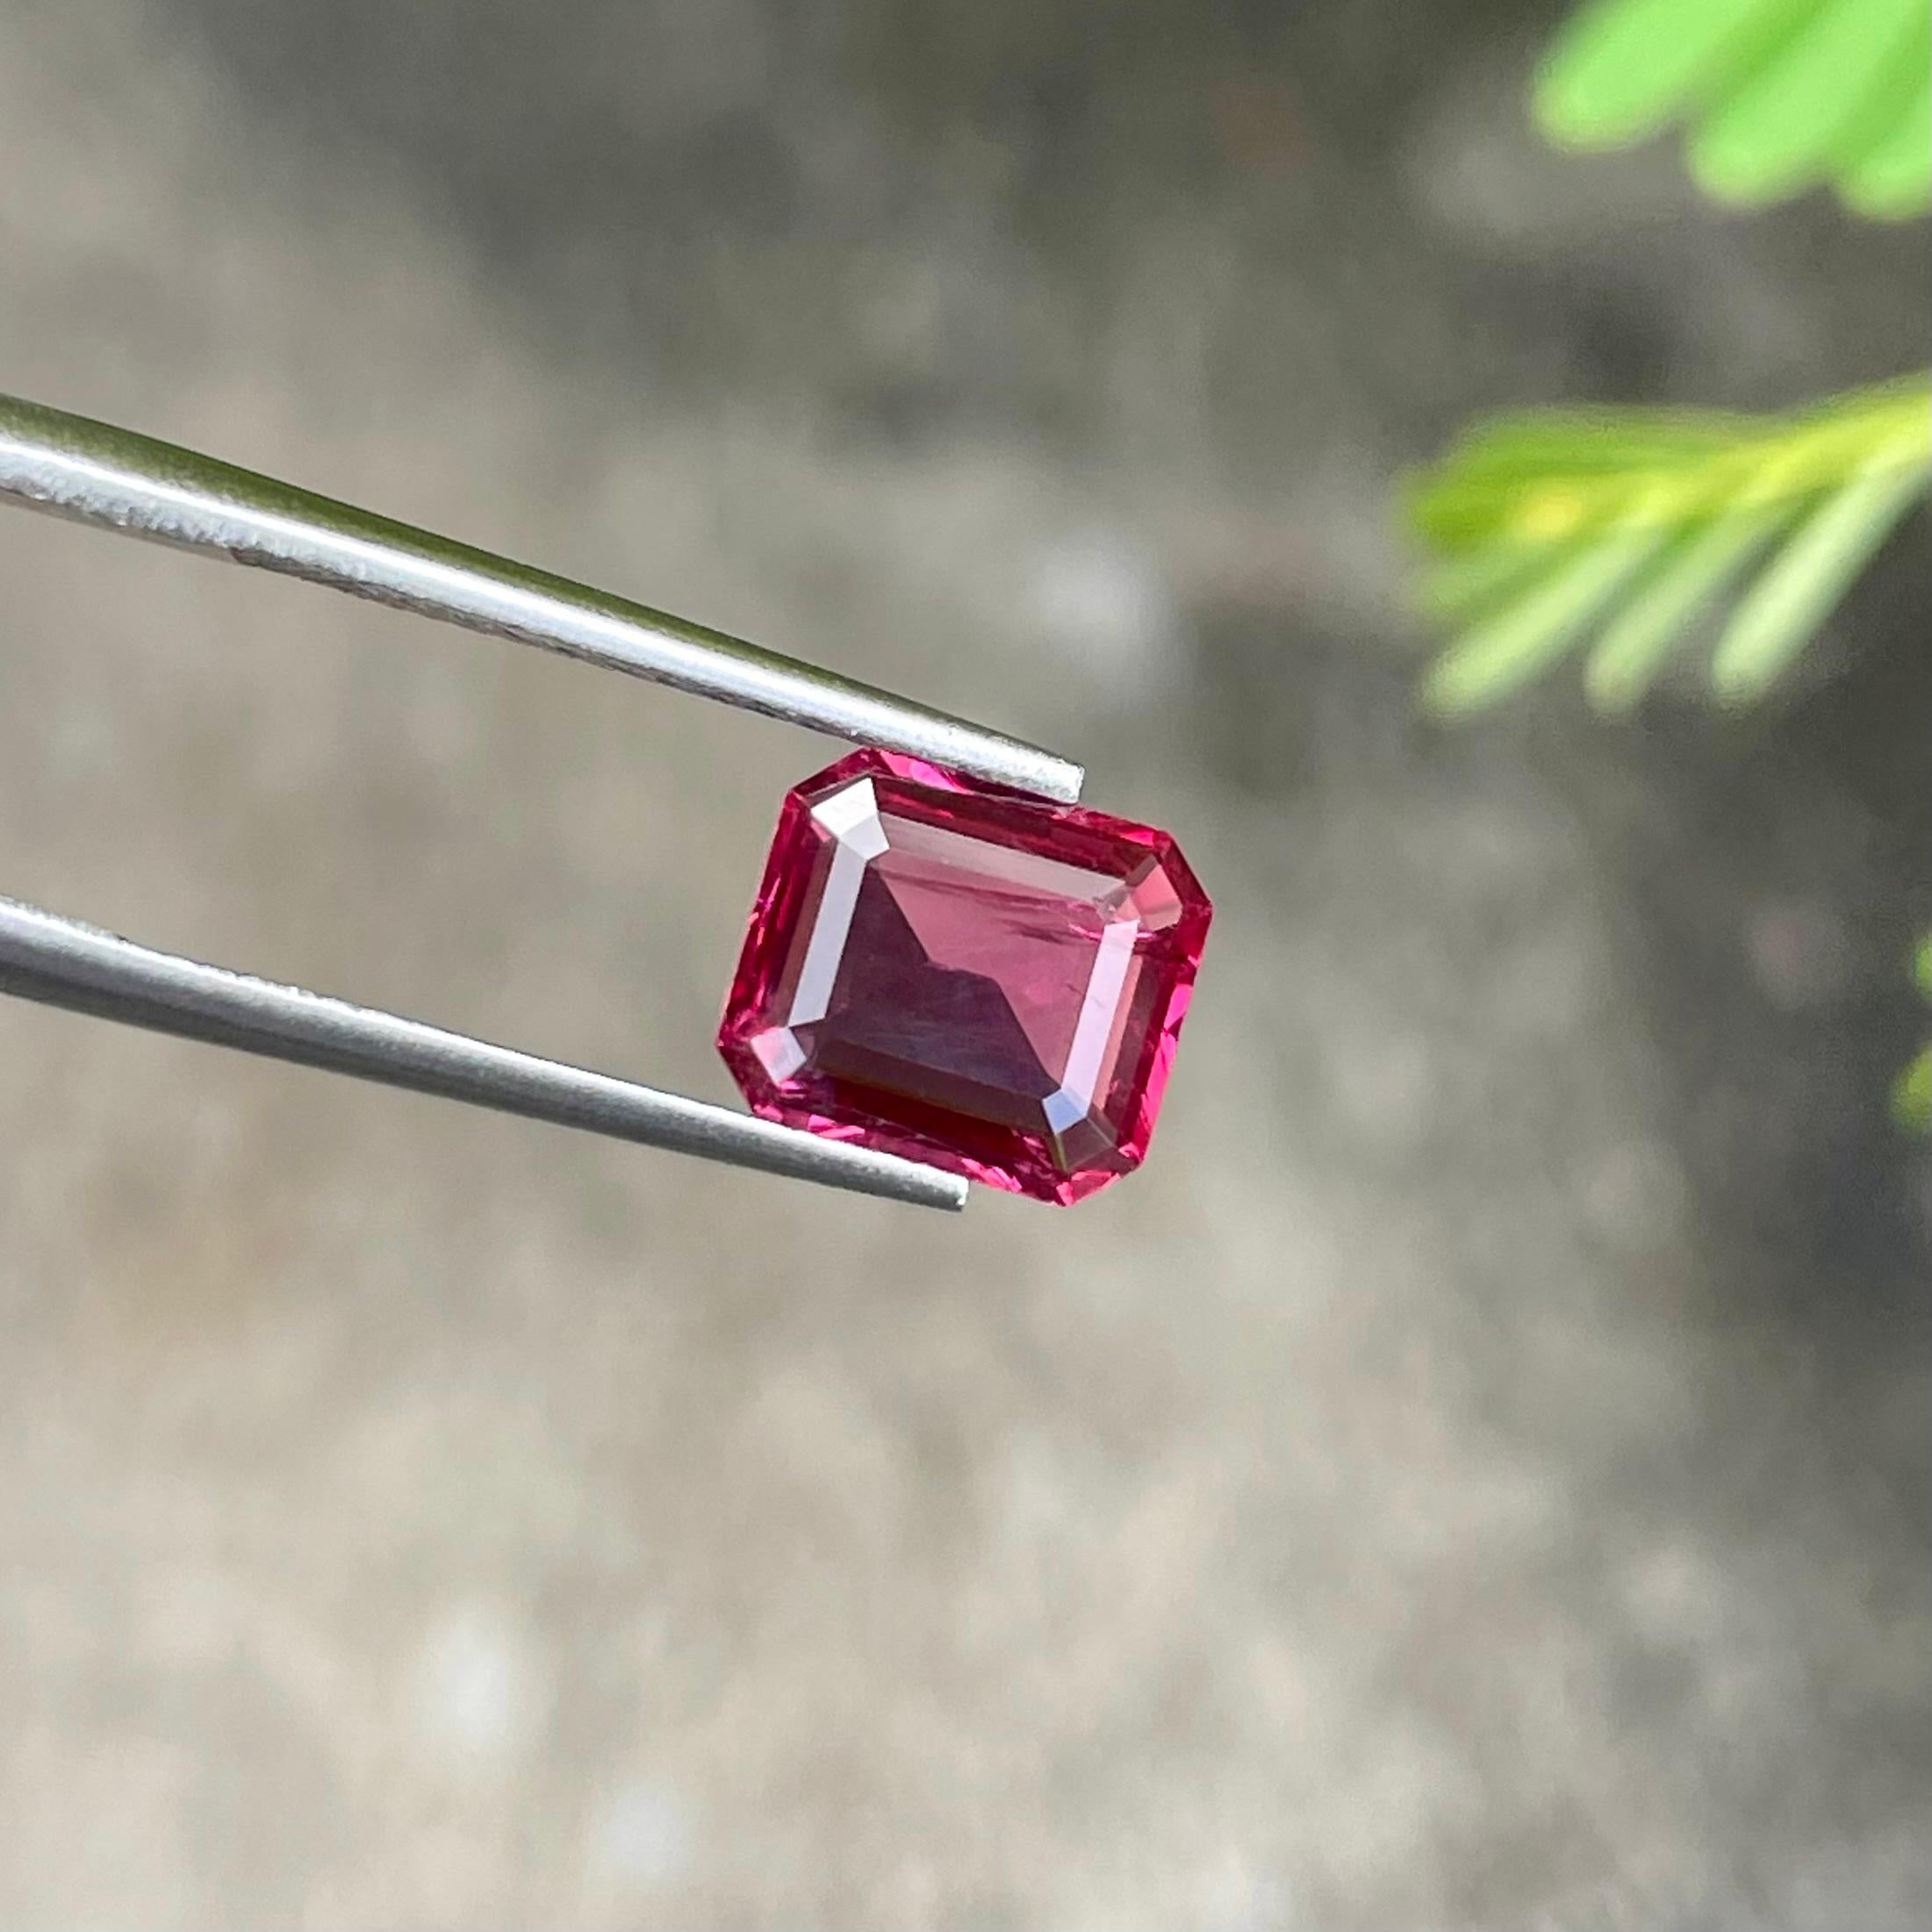 Weight 2.20 carats 
Dim 8.9x7.8x3.1 mm
Origin Burma
Cut Emerald
Treatment None
Shape Octagon
Clarity SI





Introducing the Dark Pink Loose Spinel, a truly captivating gemstone with a weight of 2.20 carats and an elegant emerald cut that enhances